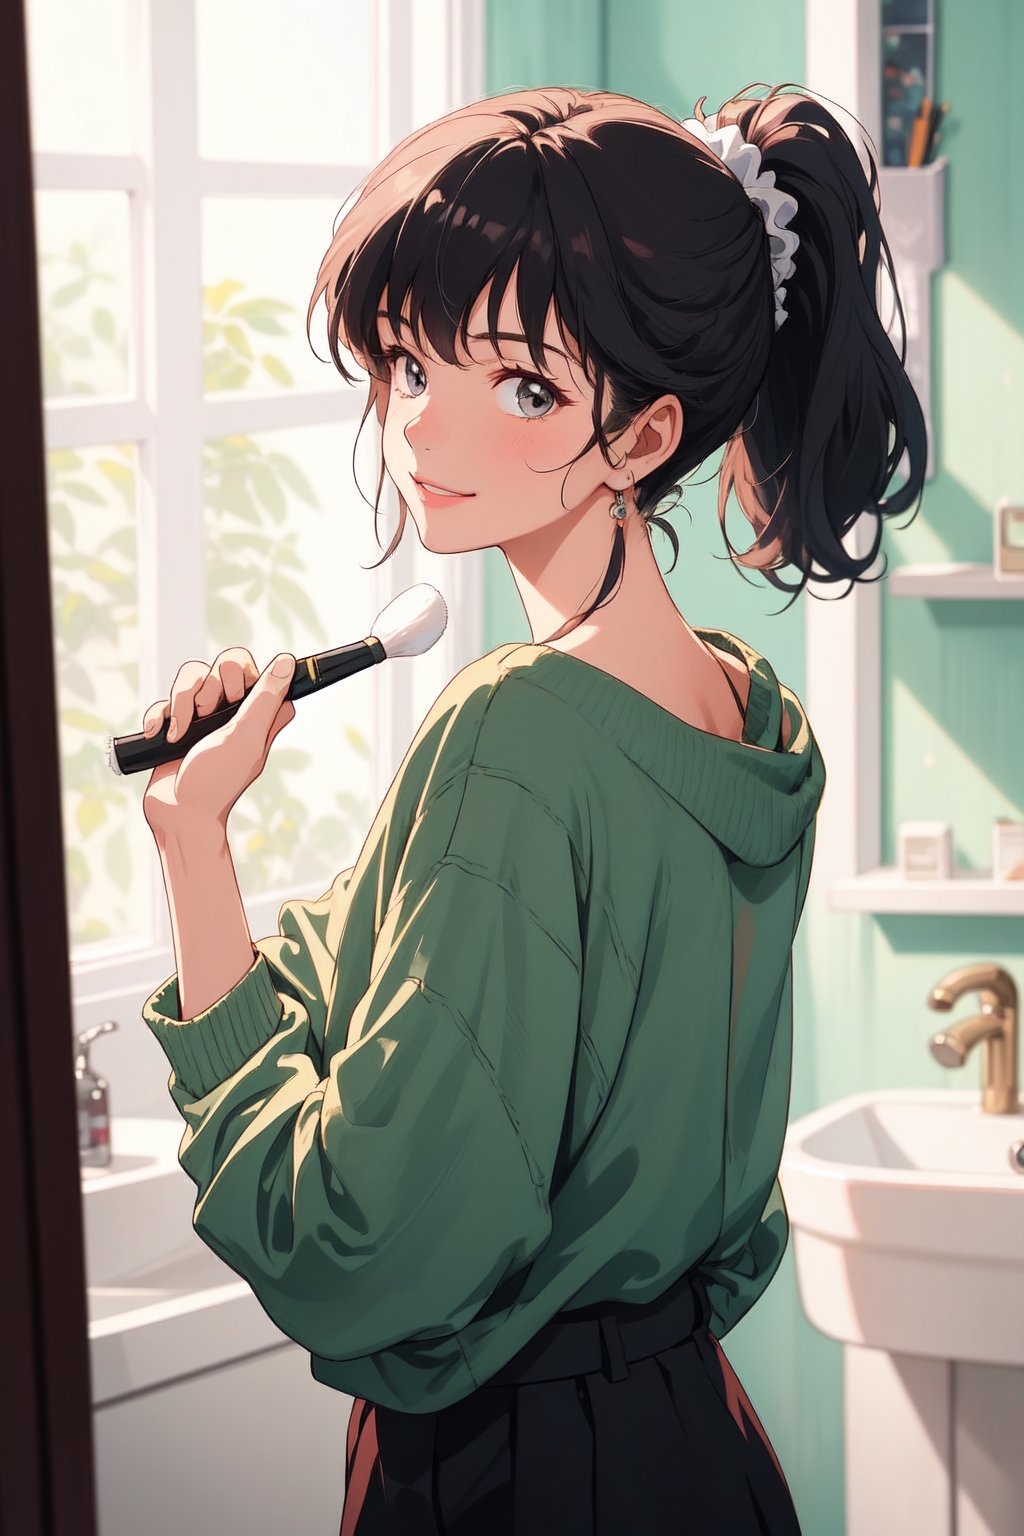 A close-up of a girl's face as she is doing a ponytail hairstyle. She is holding a ponytail holder in one hand and a brush in the other. She is looking at the mirror and smiling. The background is blurred, but you can see that she is standing in her bathroom.